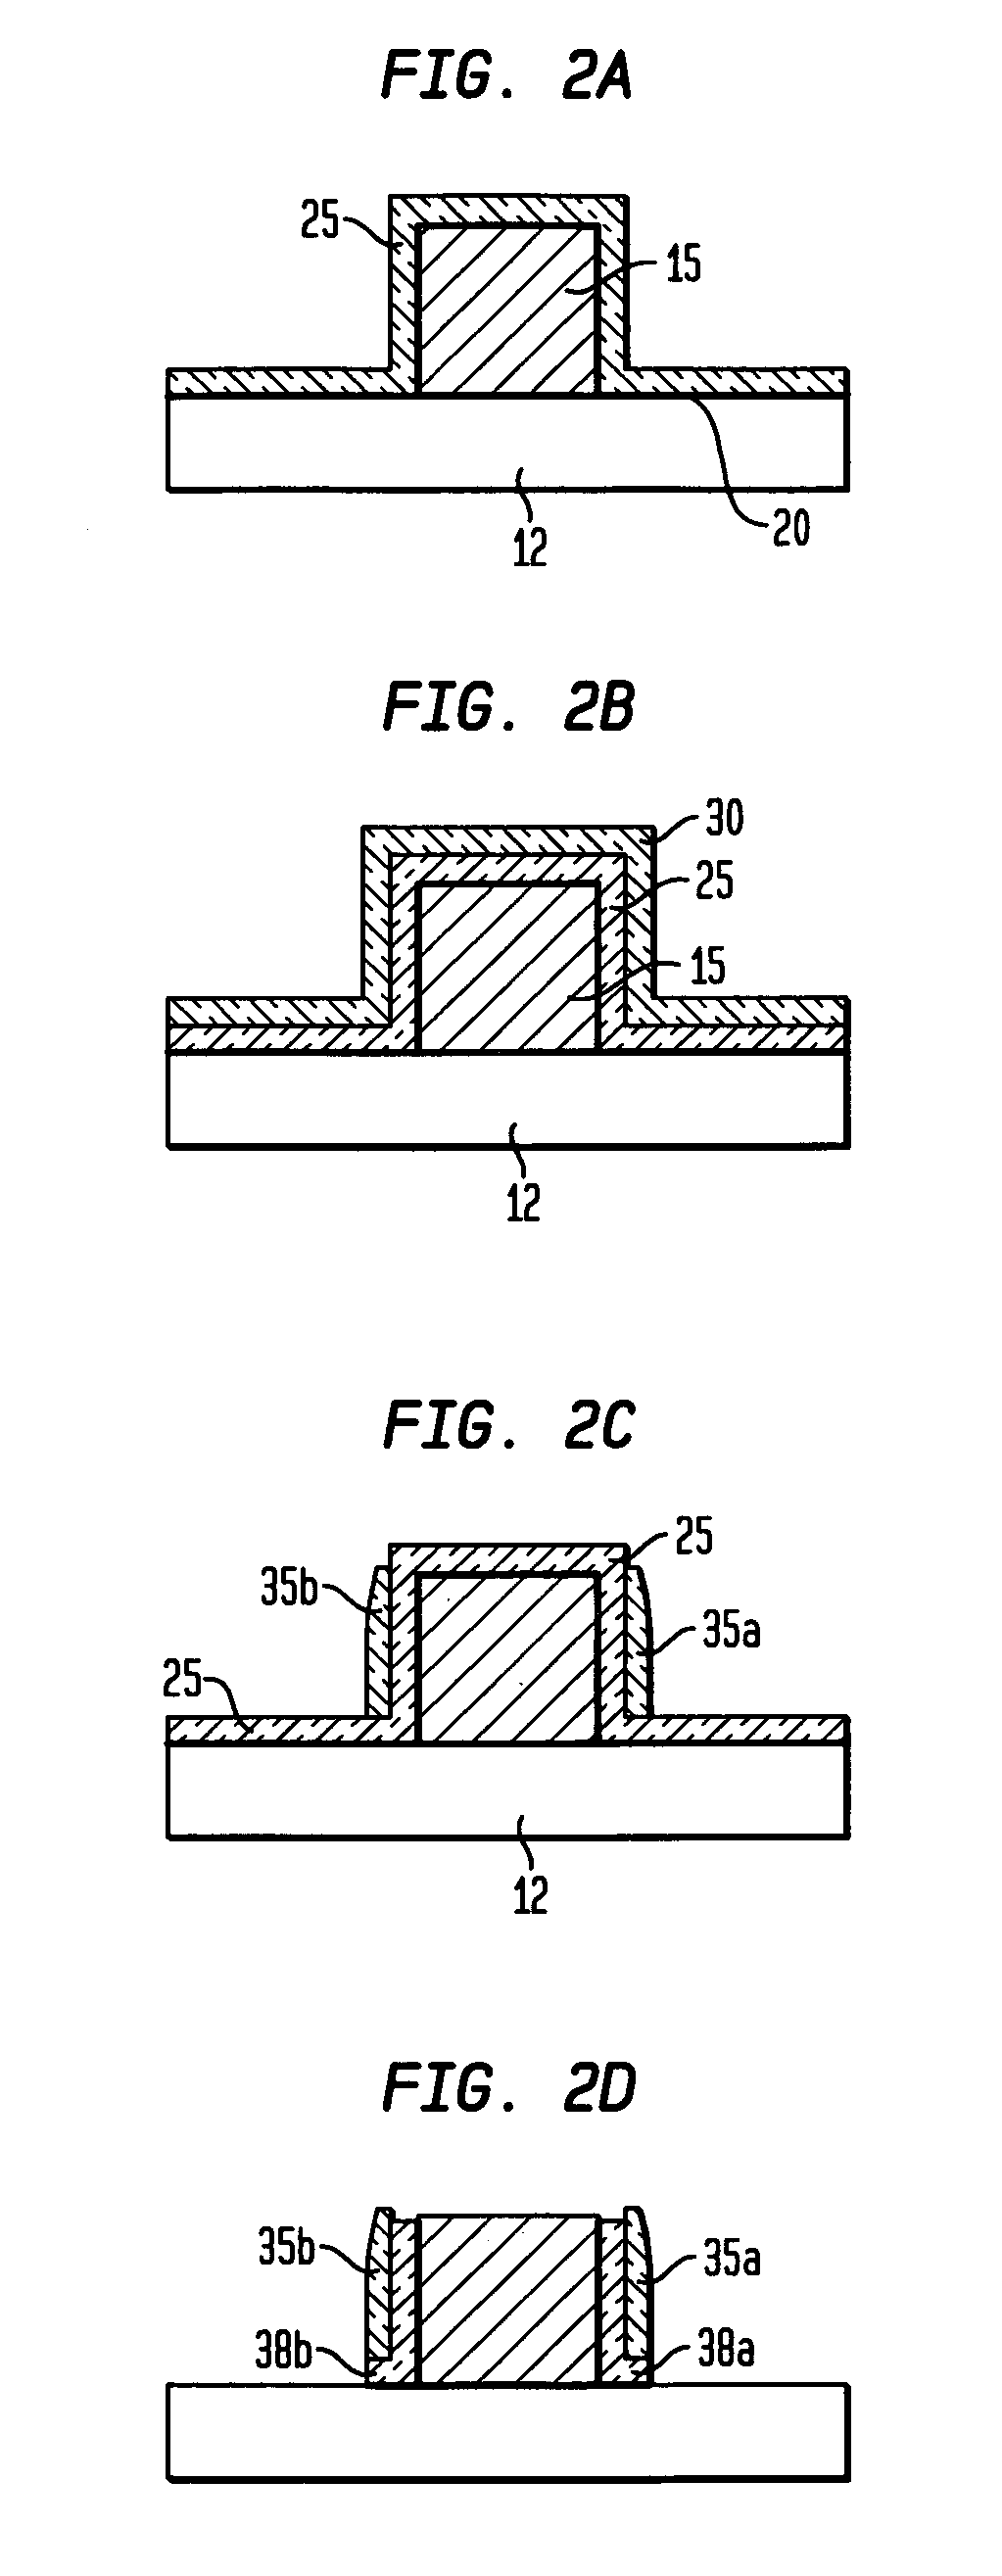 Method for avoiding oxide undercut during pre-silicide clean for thin spacer FETs